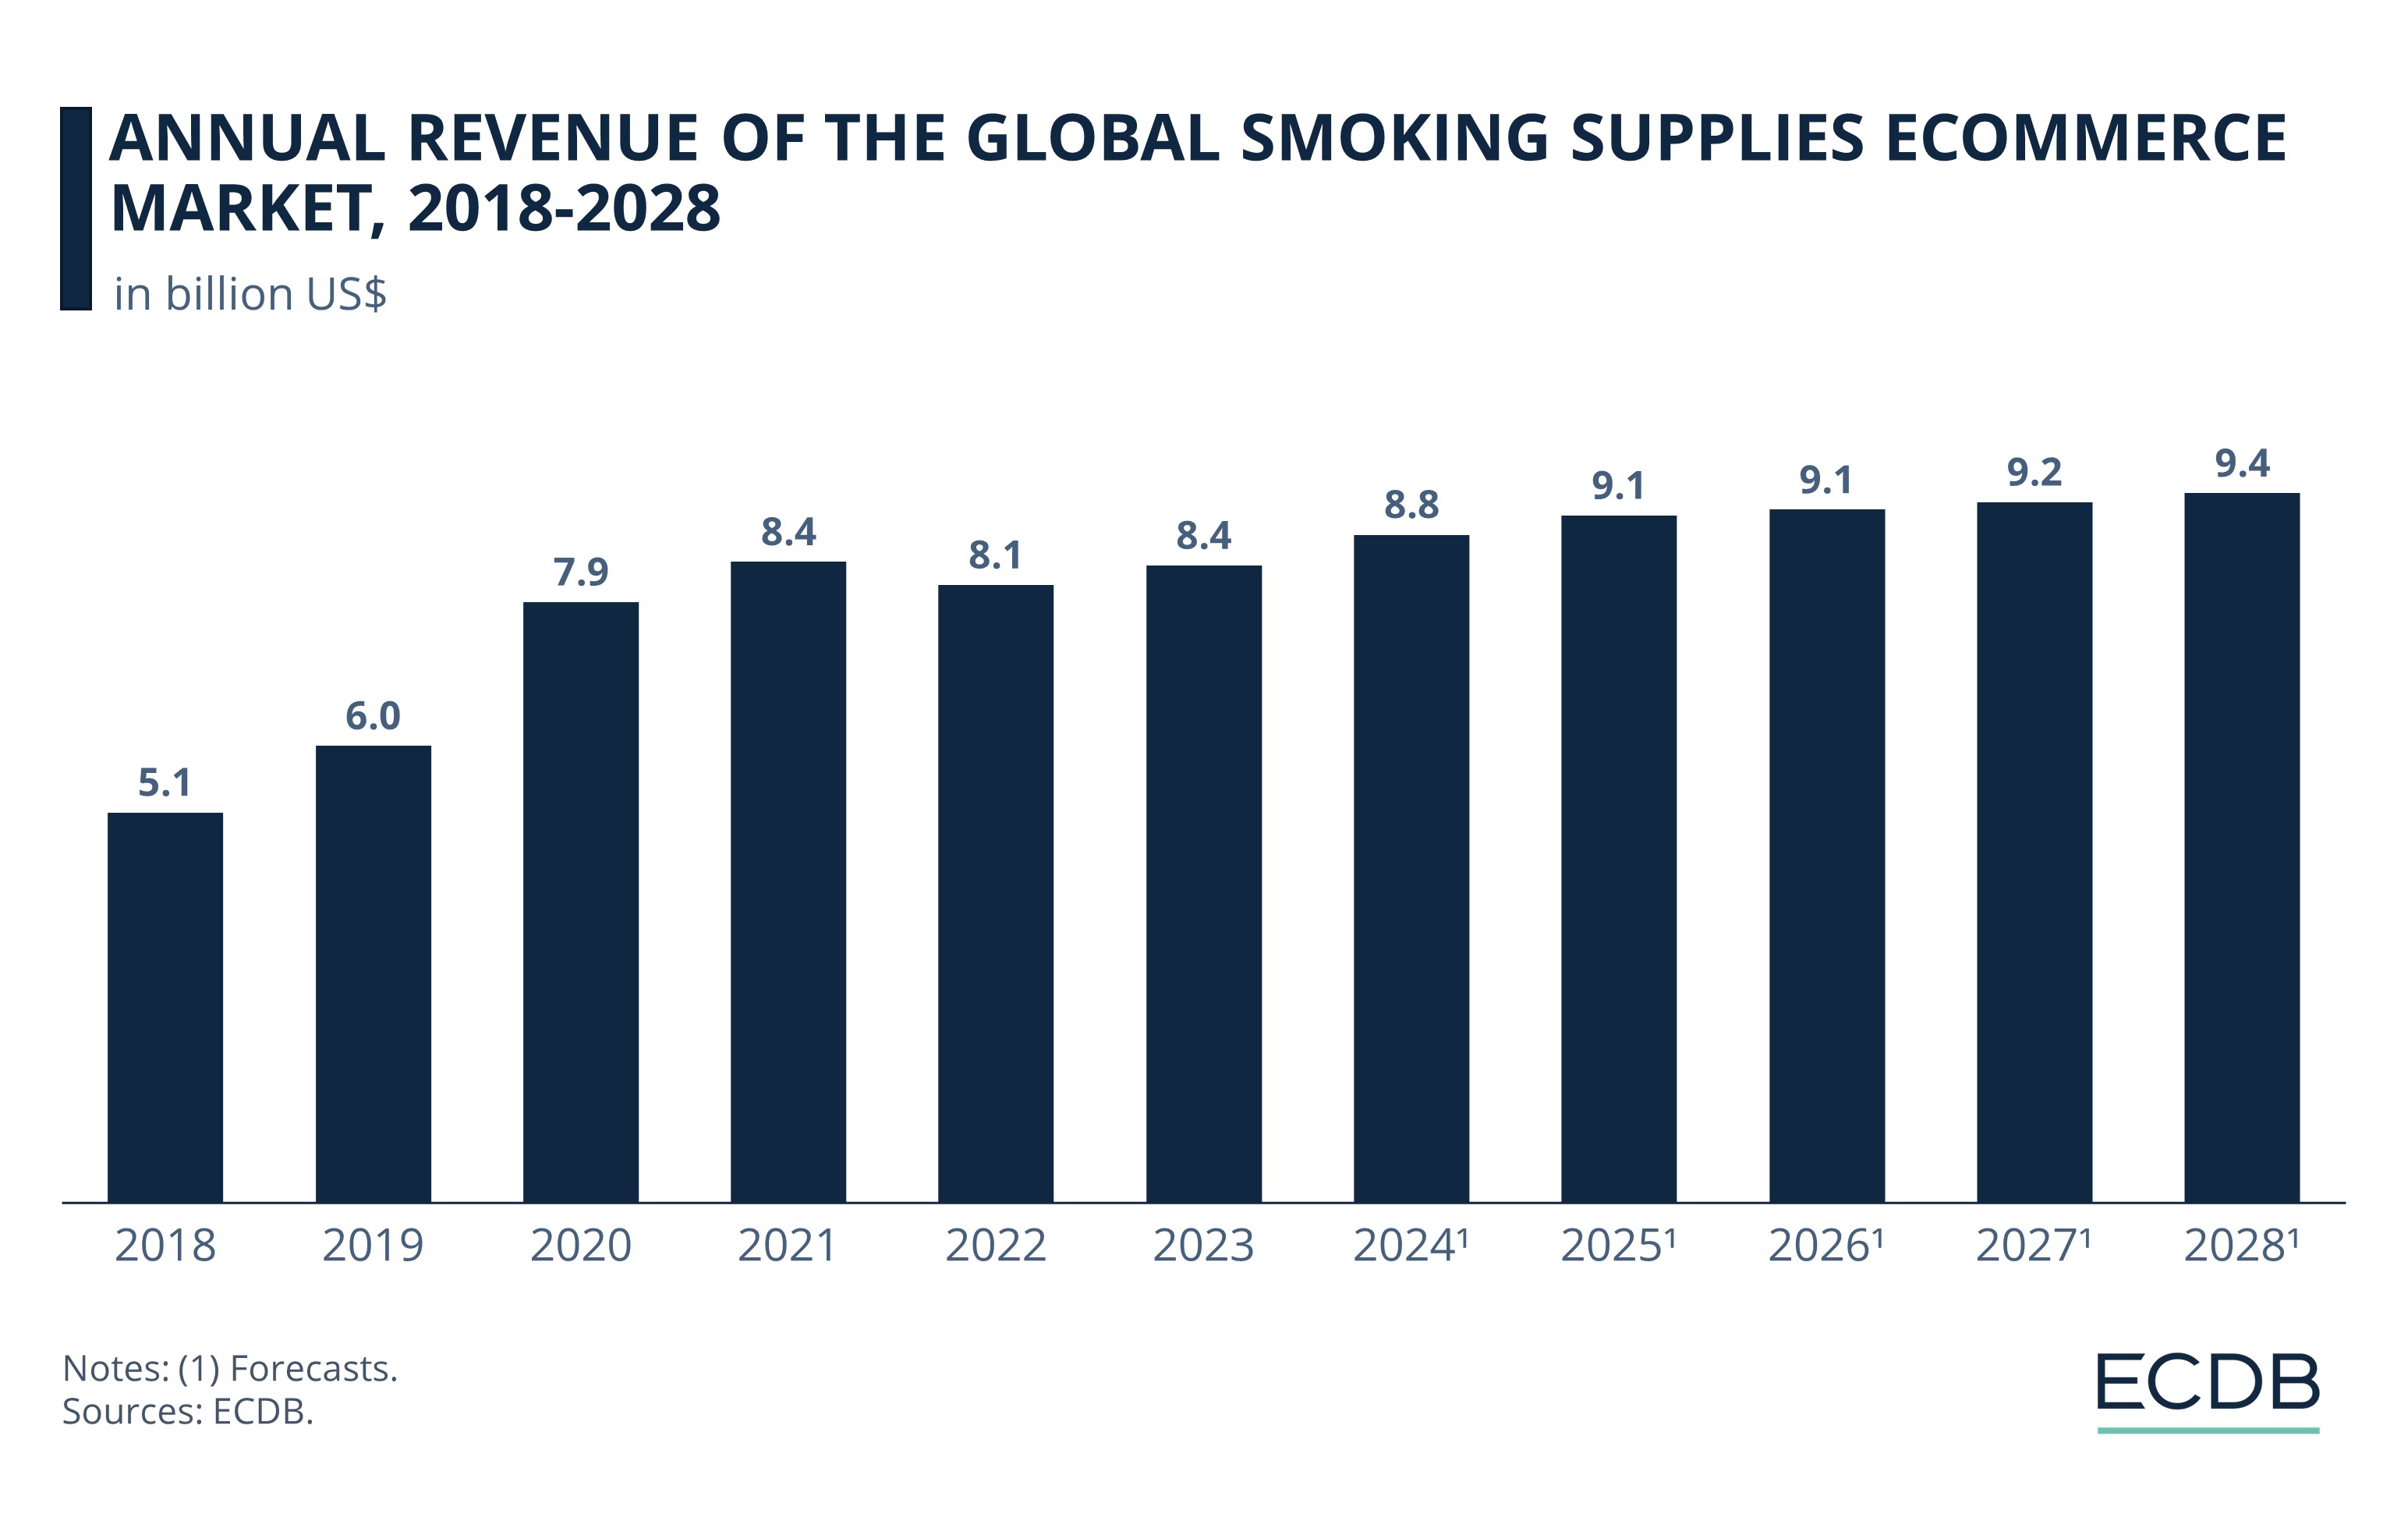 Annual Revenue of the Global Smoking Supplies eCommerce Market, 2018-2028